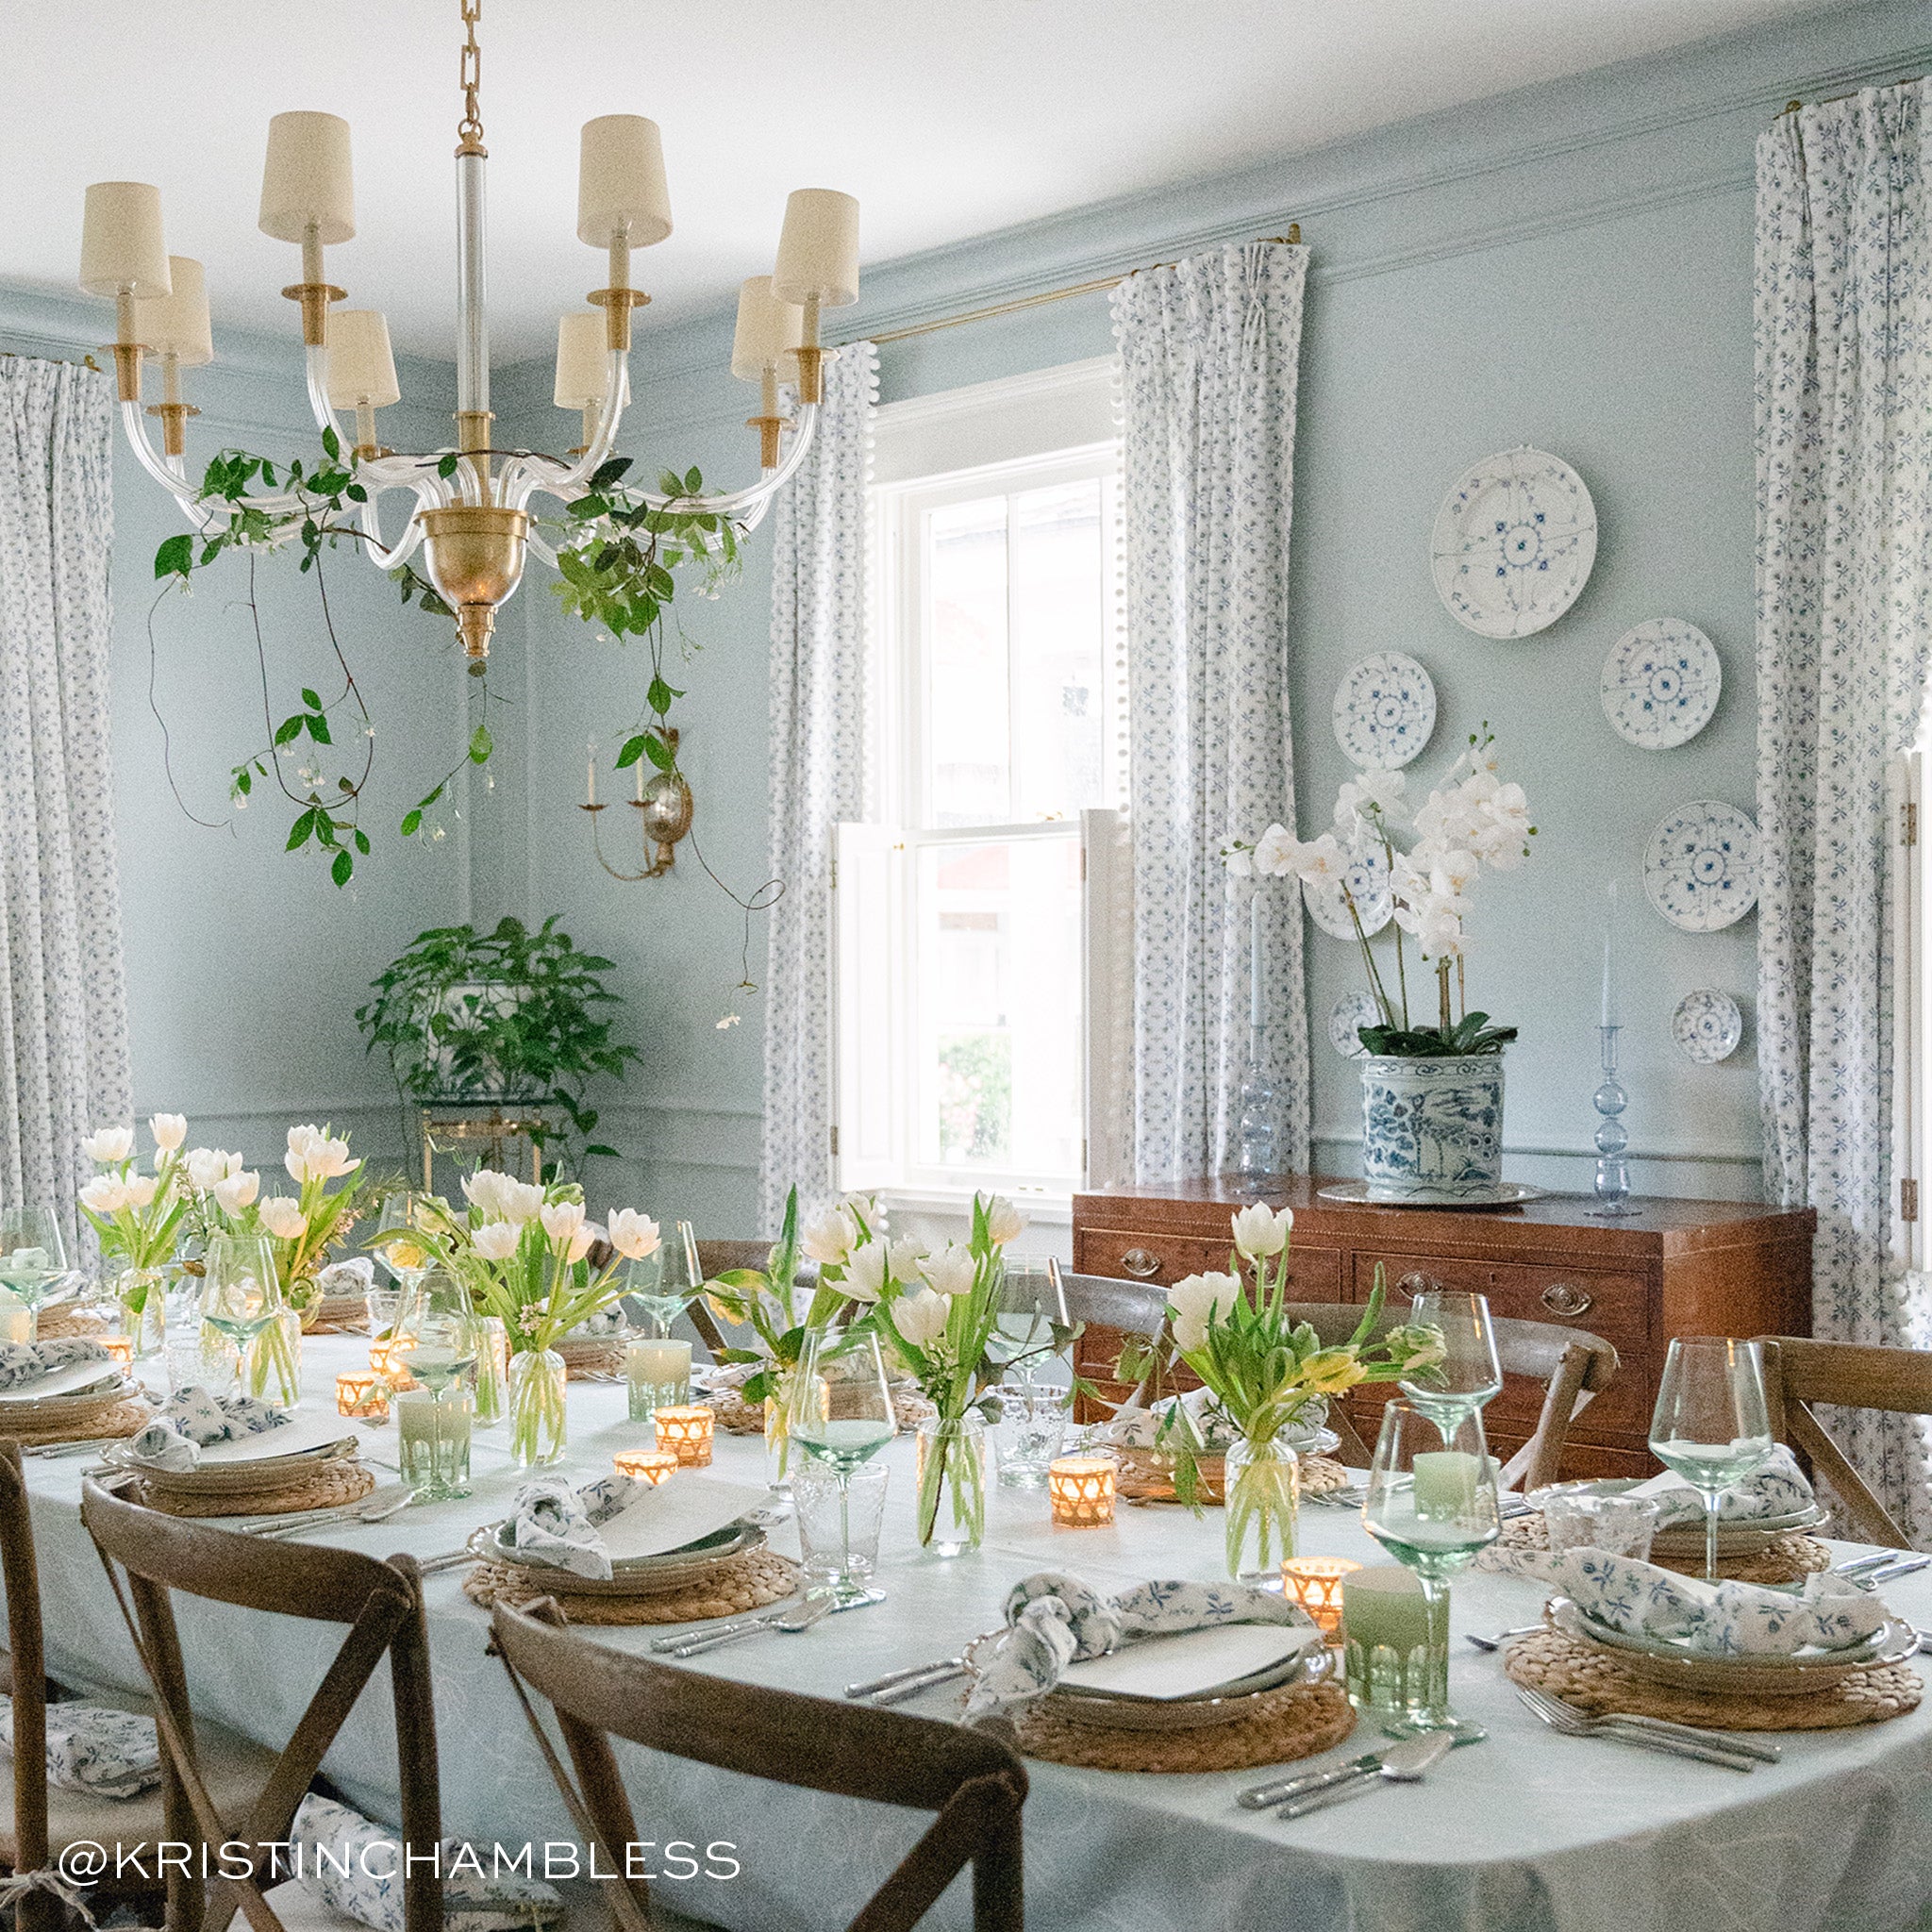 Dining room with white chandelier styled with Blue & Green Floral Printed Curtains. Photo taken by Kristin Chambless